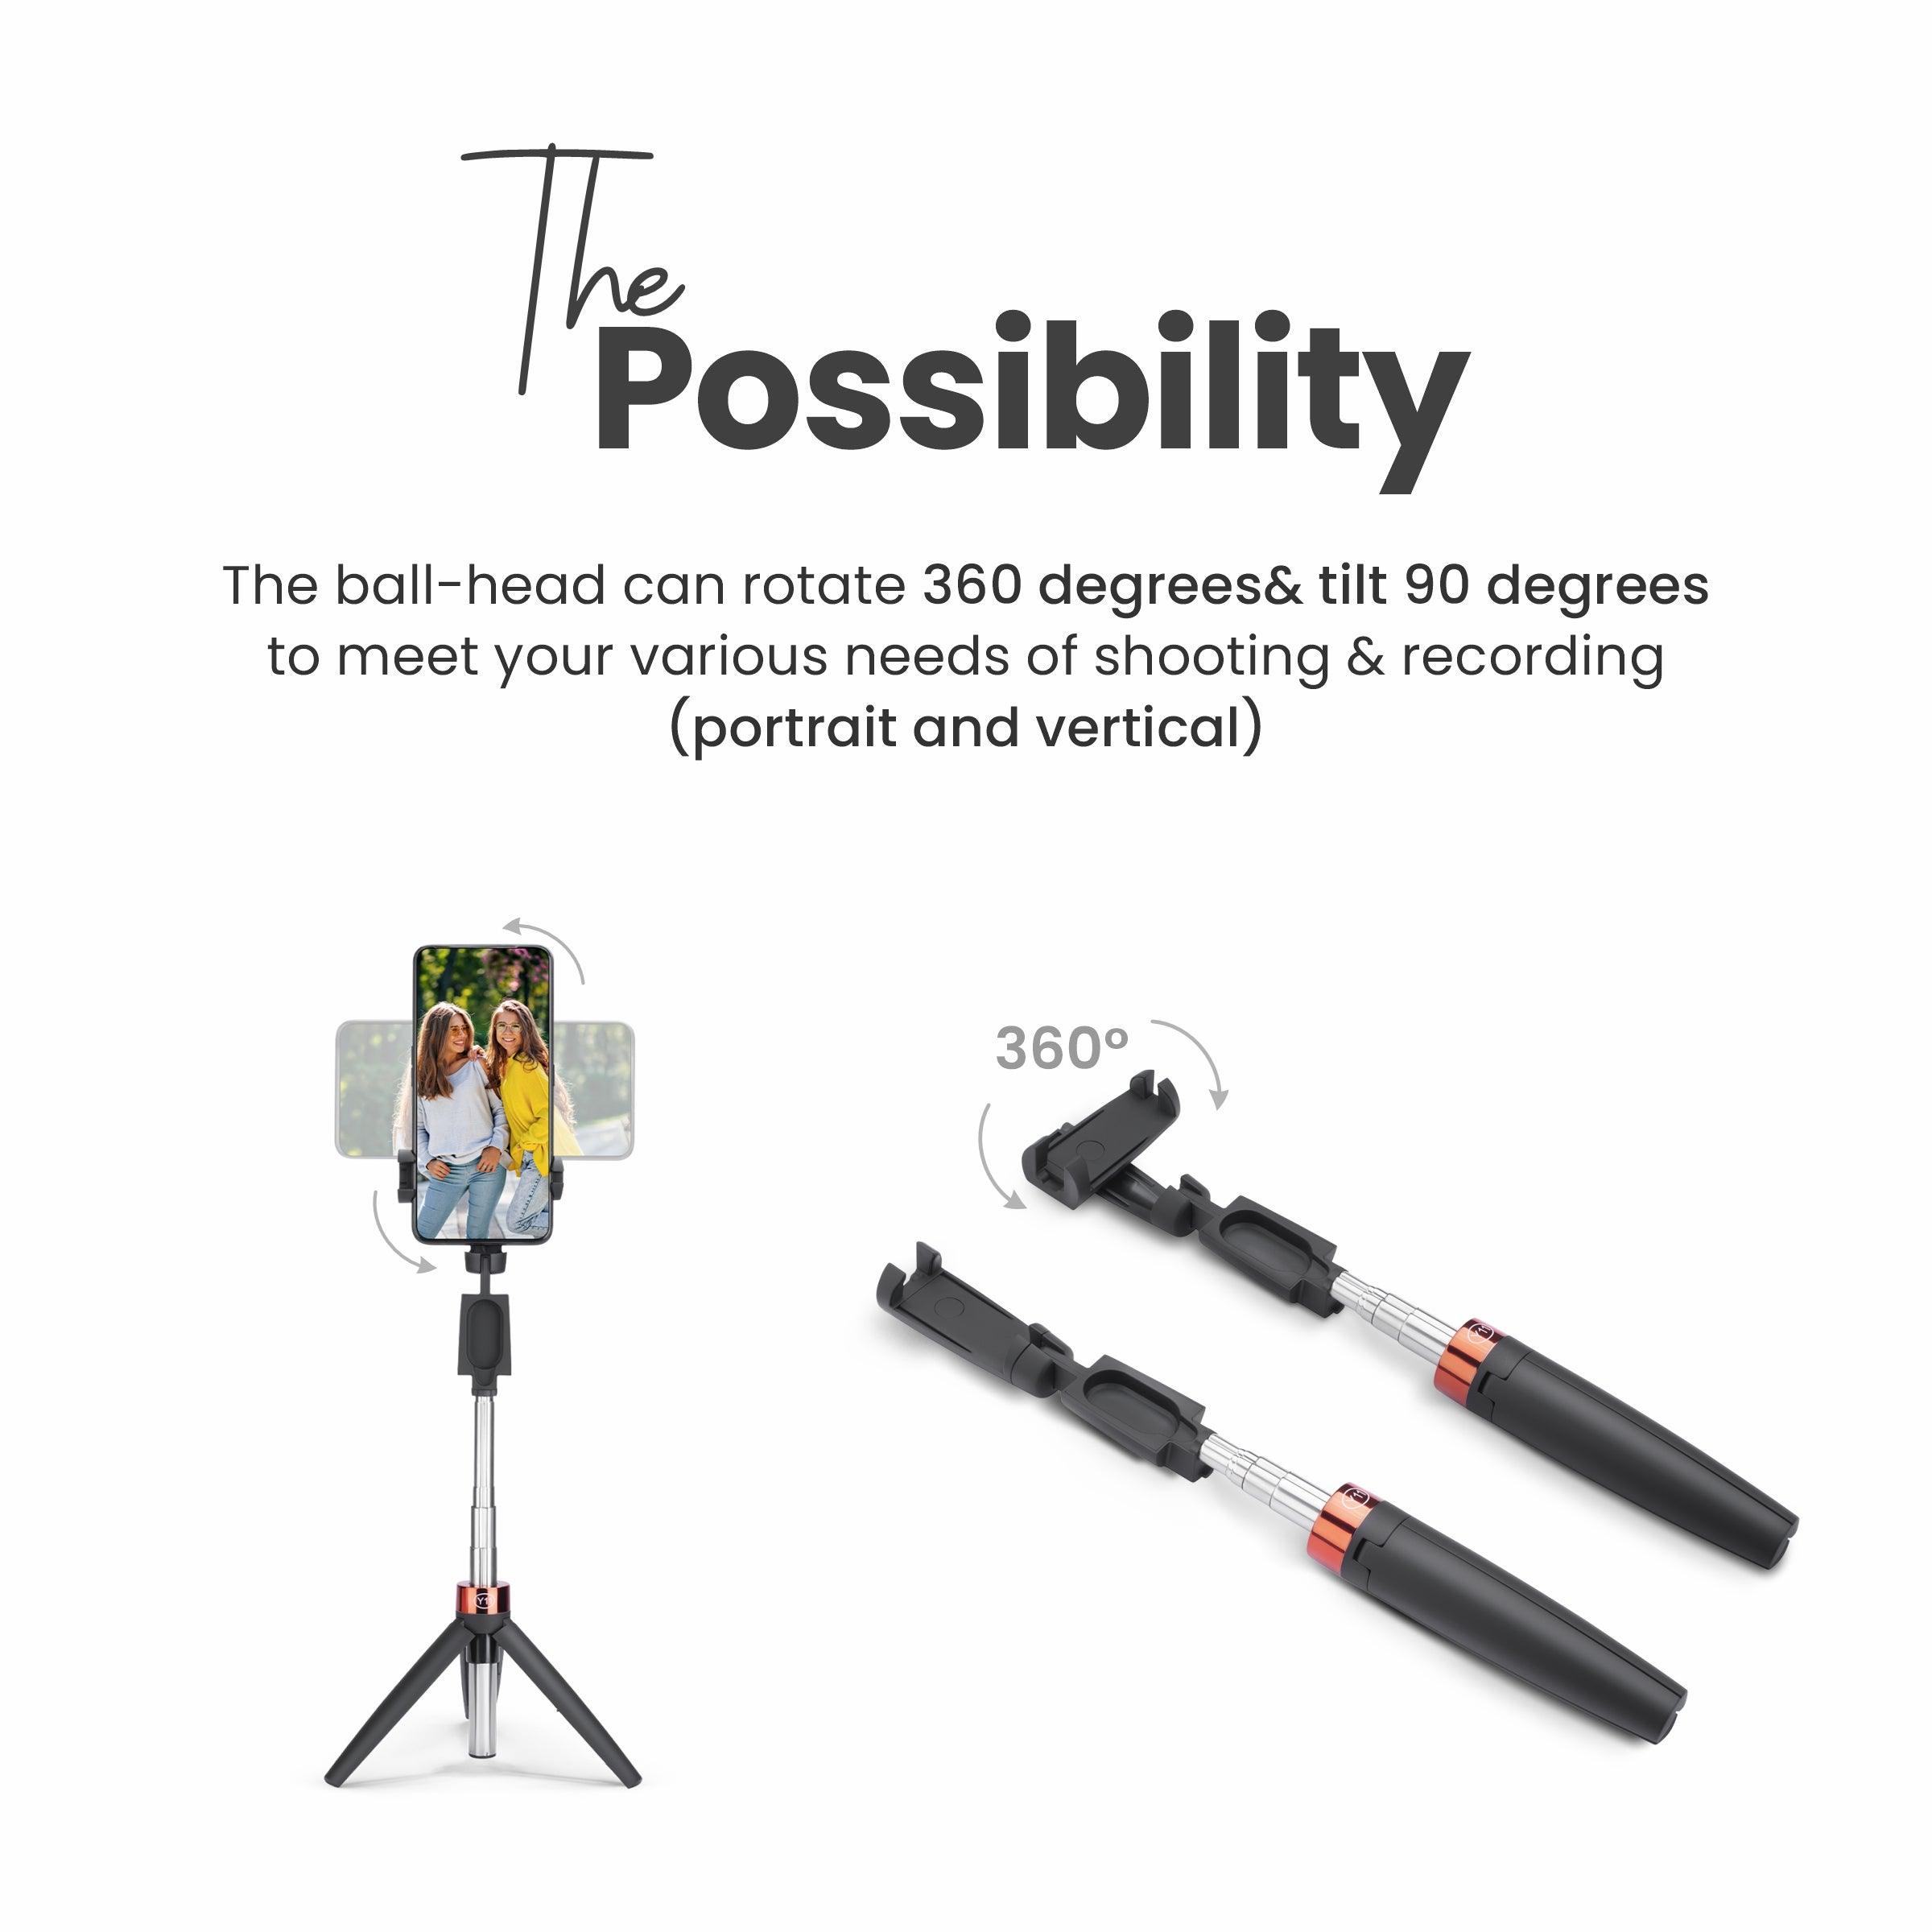 Digitek (DTR-210SS) Portable Selfie Stick with Wireless Remote and 3 Legs Tripod Base, Compatible for iPhone/OnePlus/Samsung/Vivo/Oppo and All Smartphones - Digitek